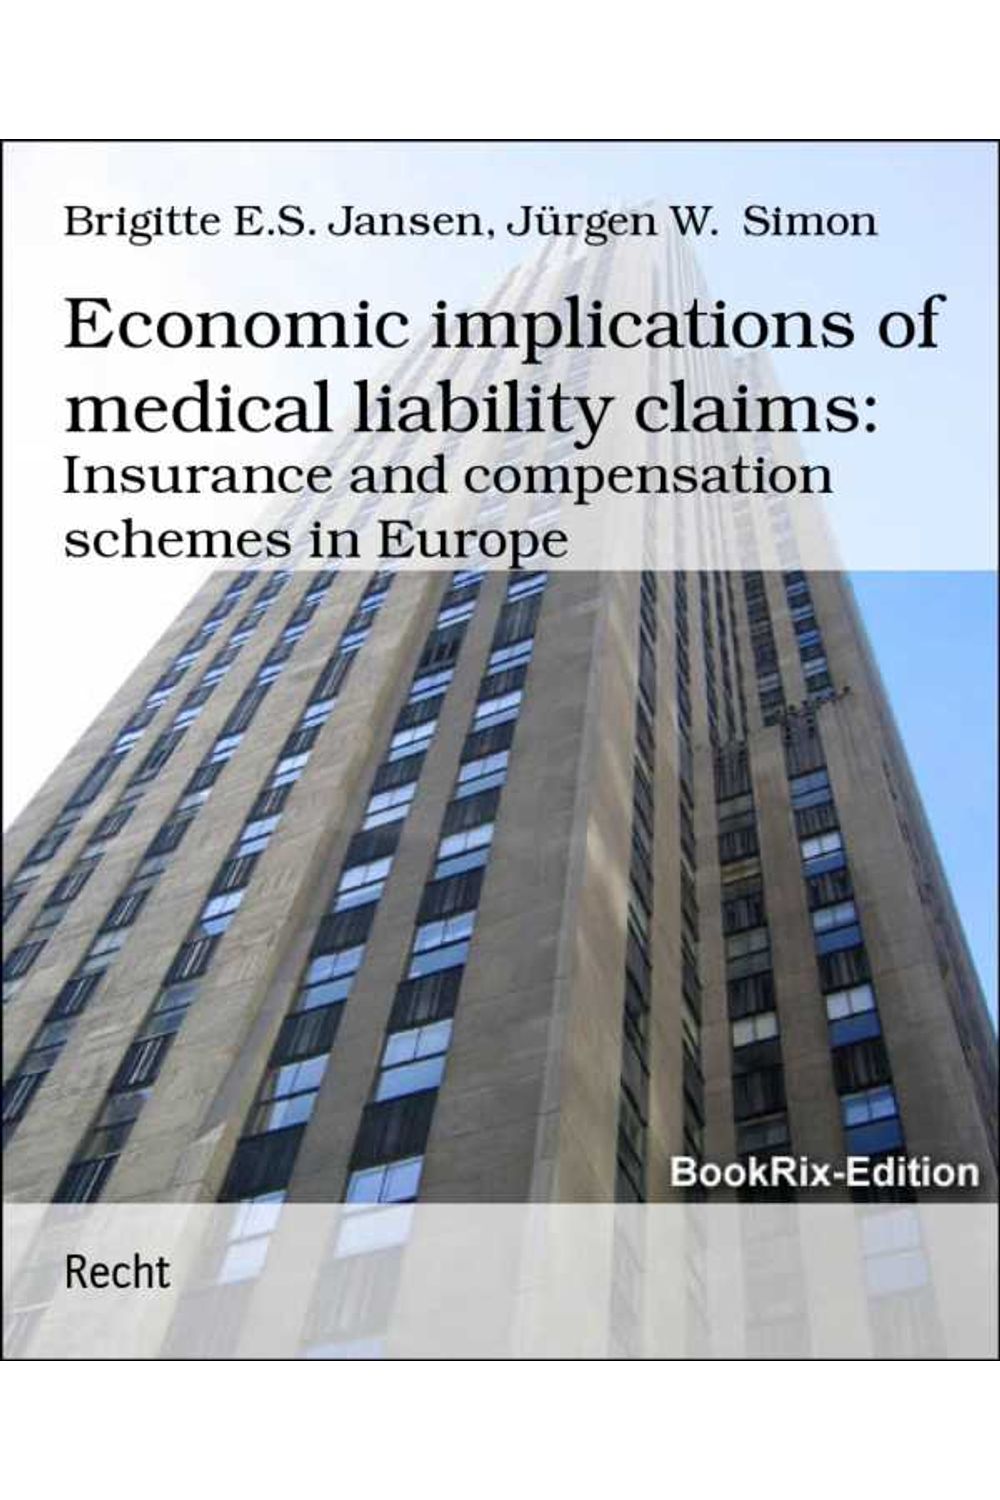 bw-economic-implications-of-medical-liability-claims-bookrix-9783743835863